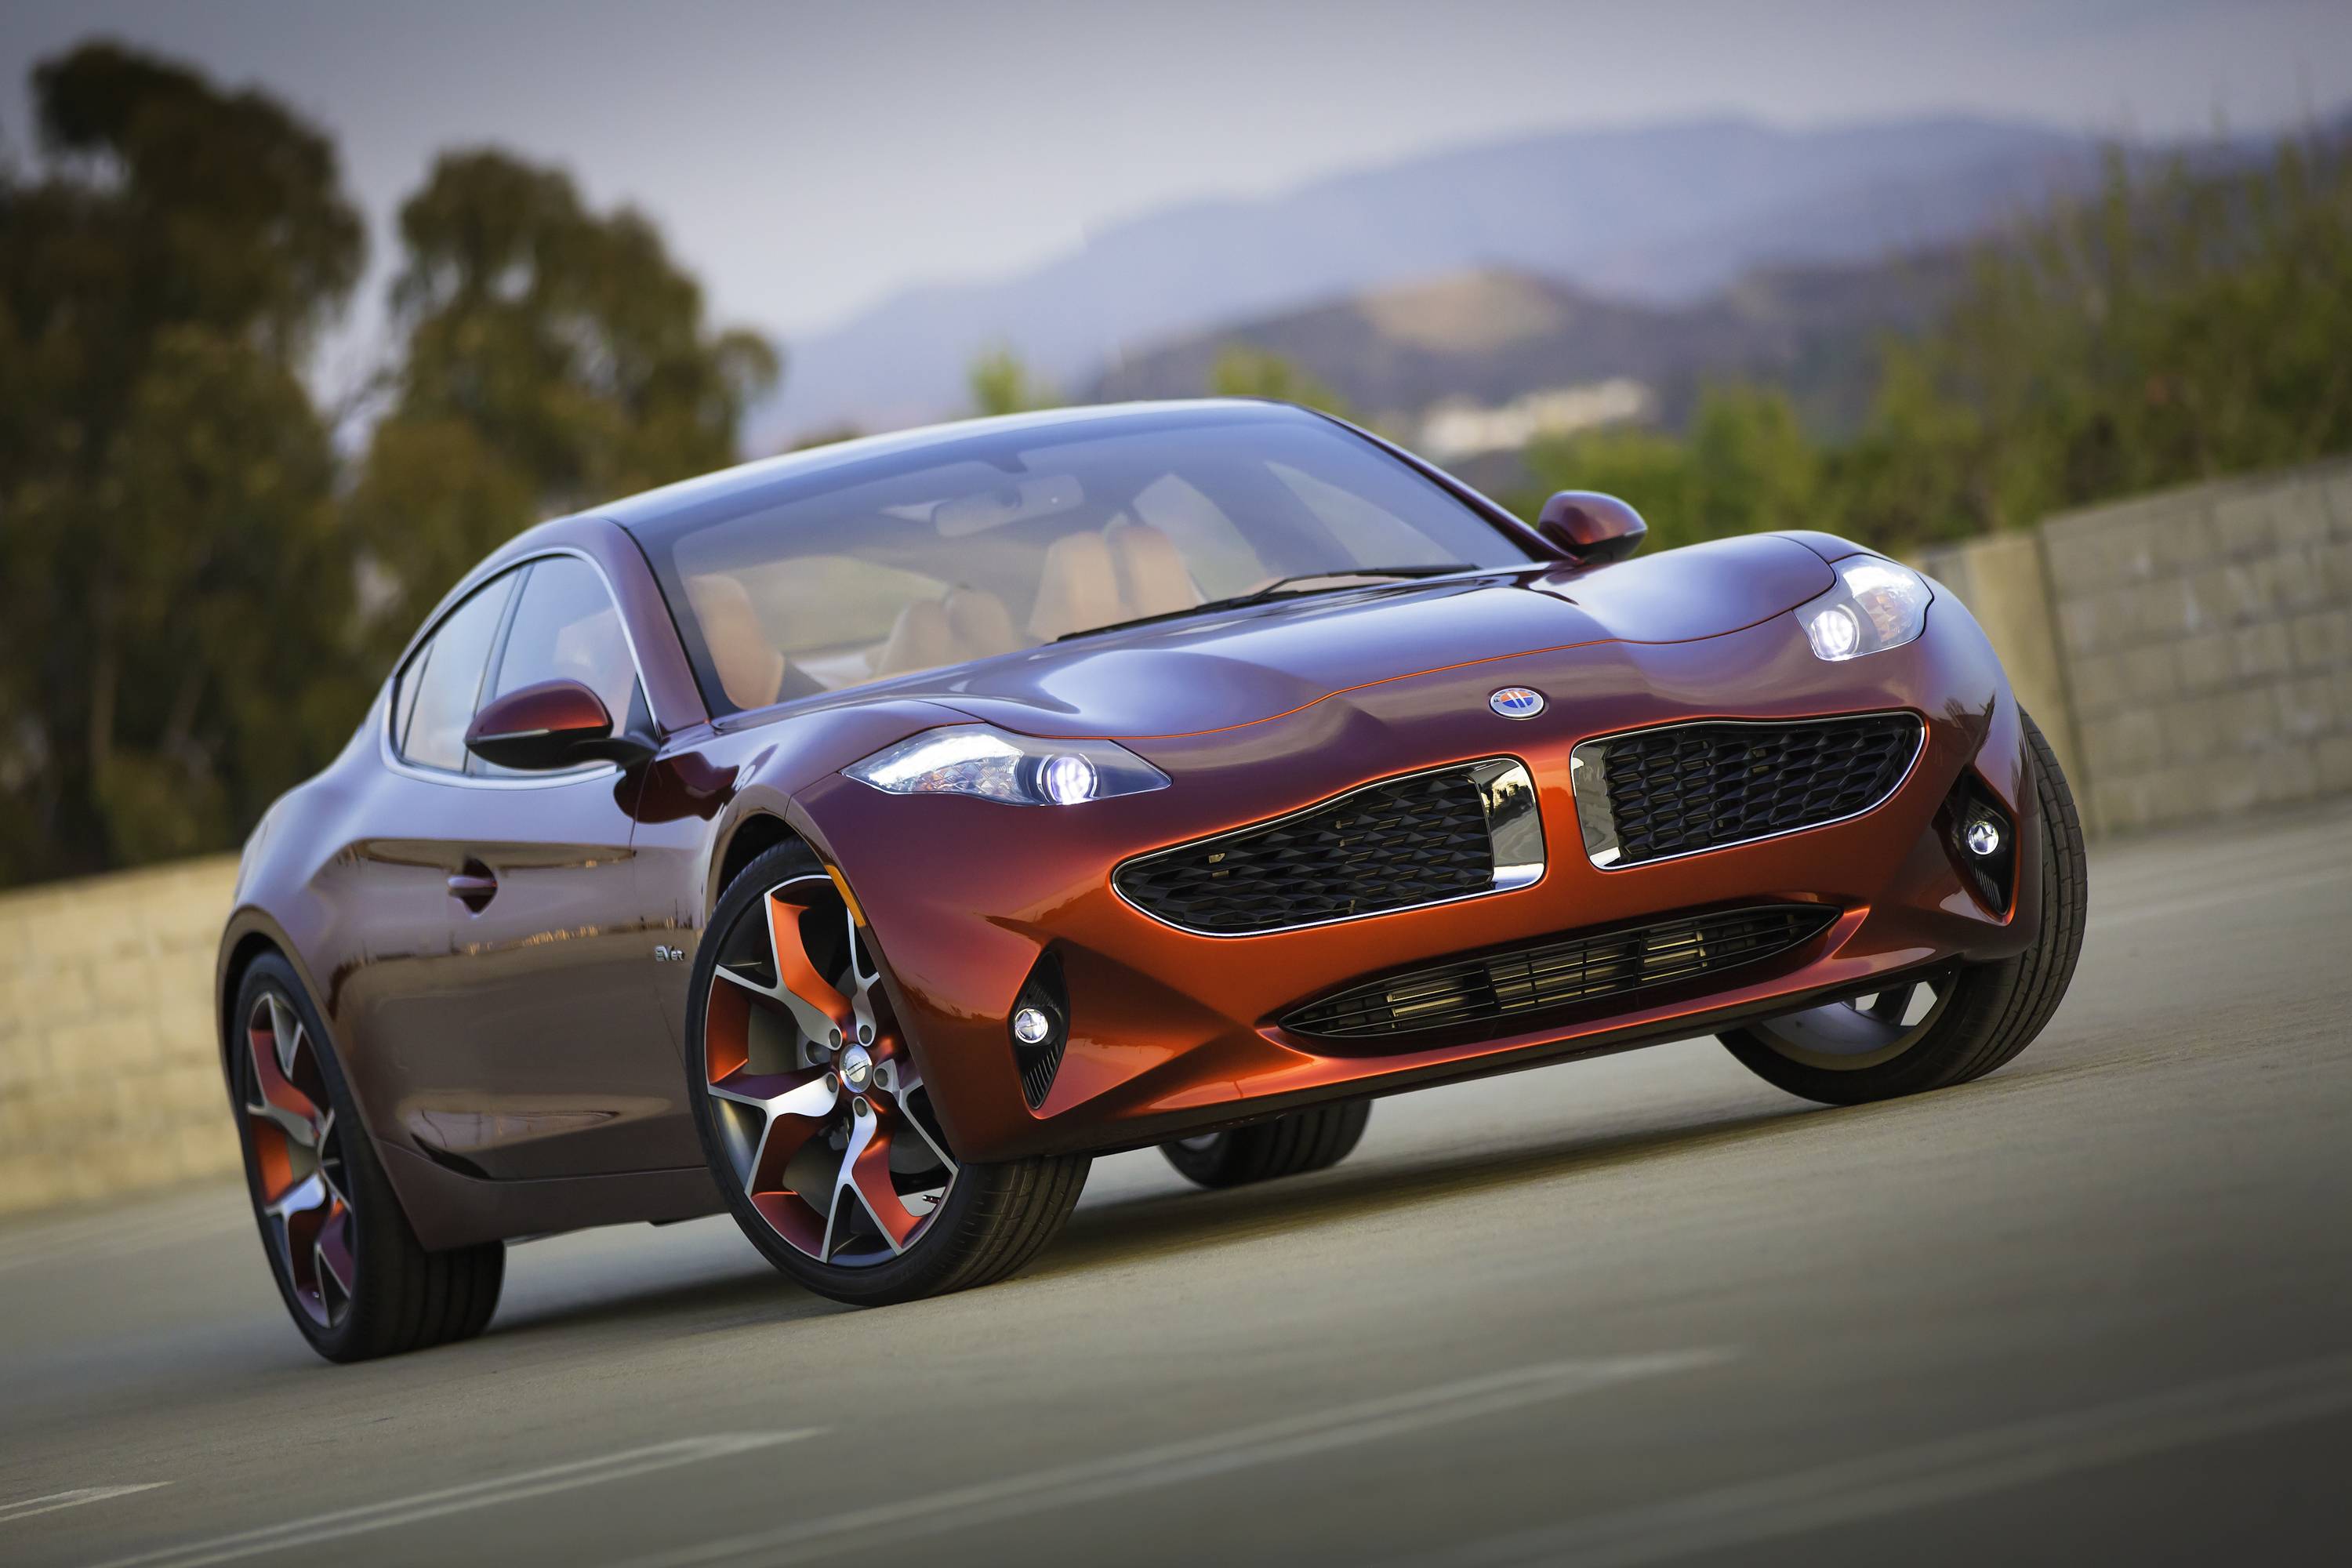 Fisker Car Company Logo - Gigaom | A look under the hood: why electric car startup Fisker ...